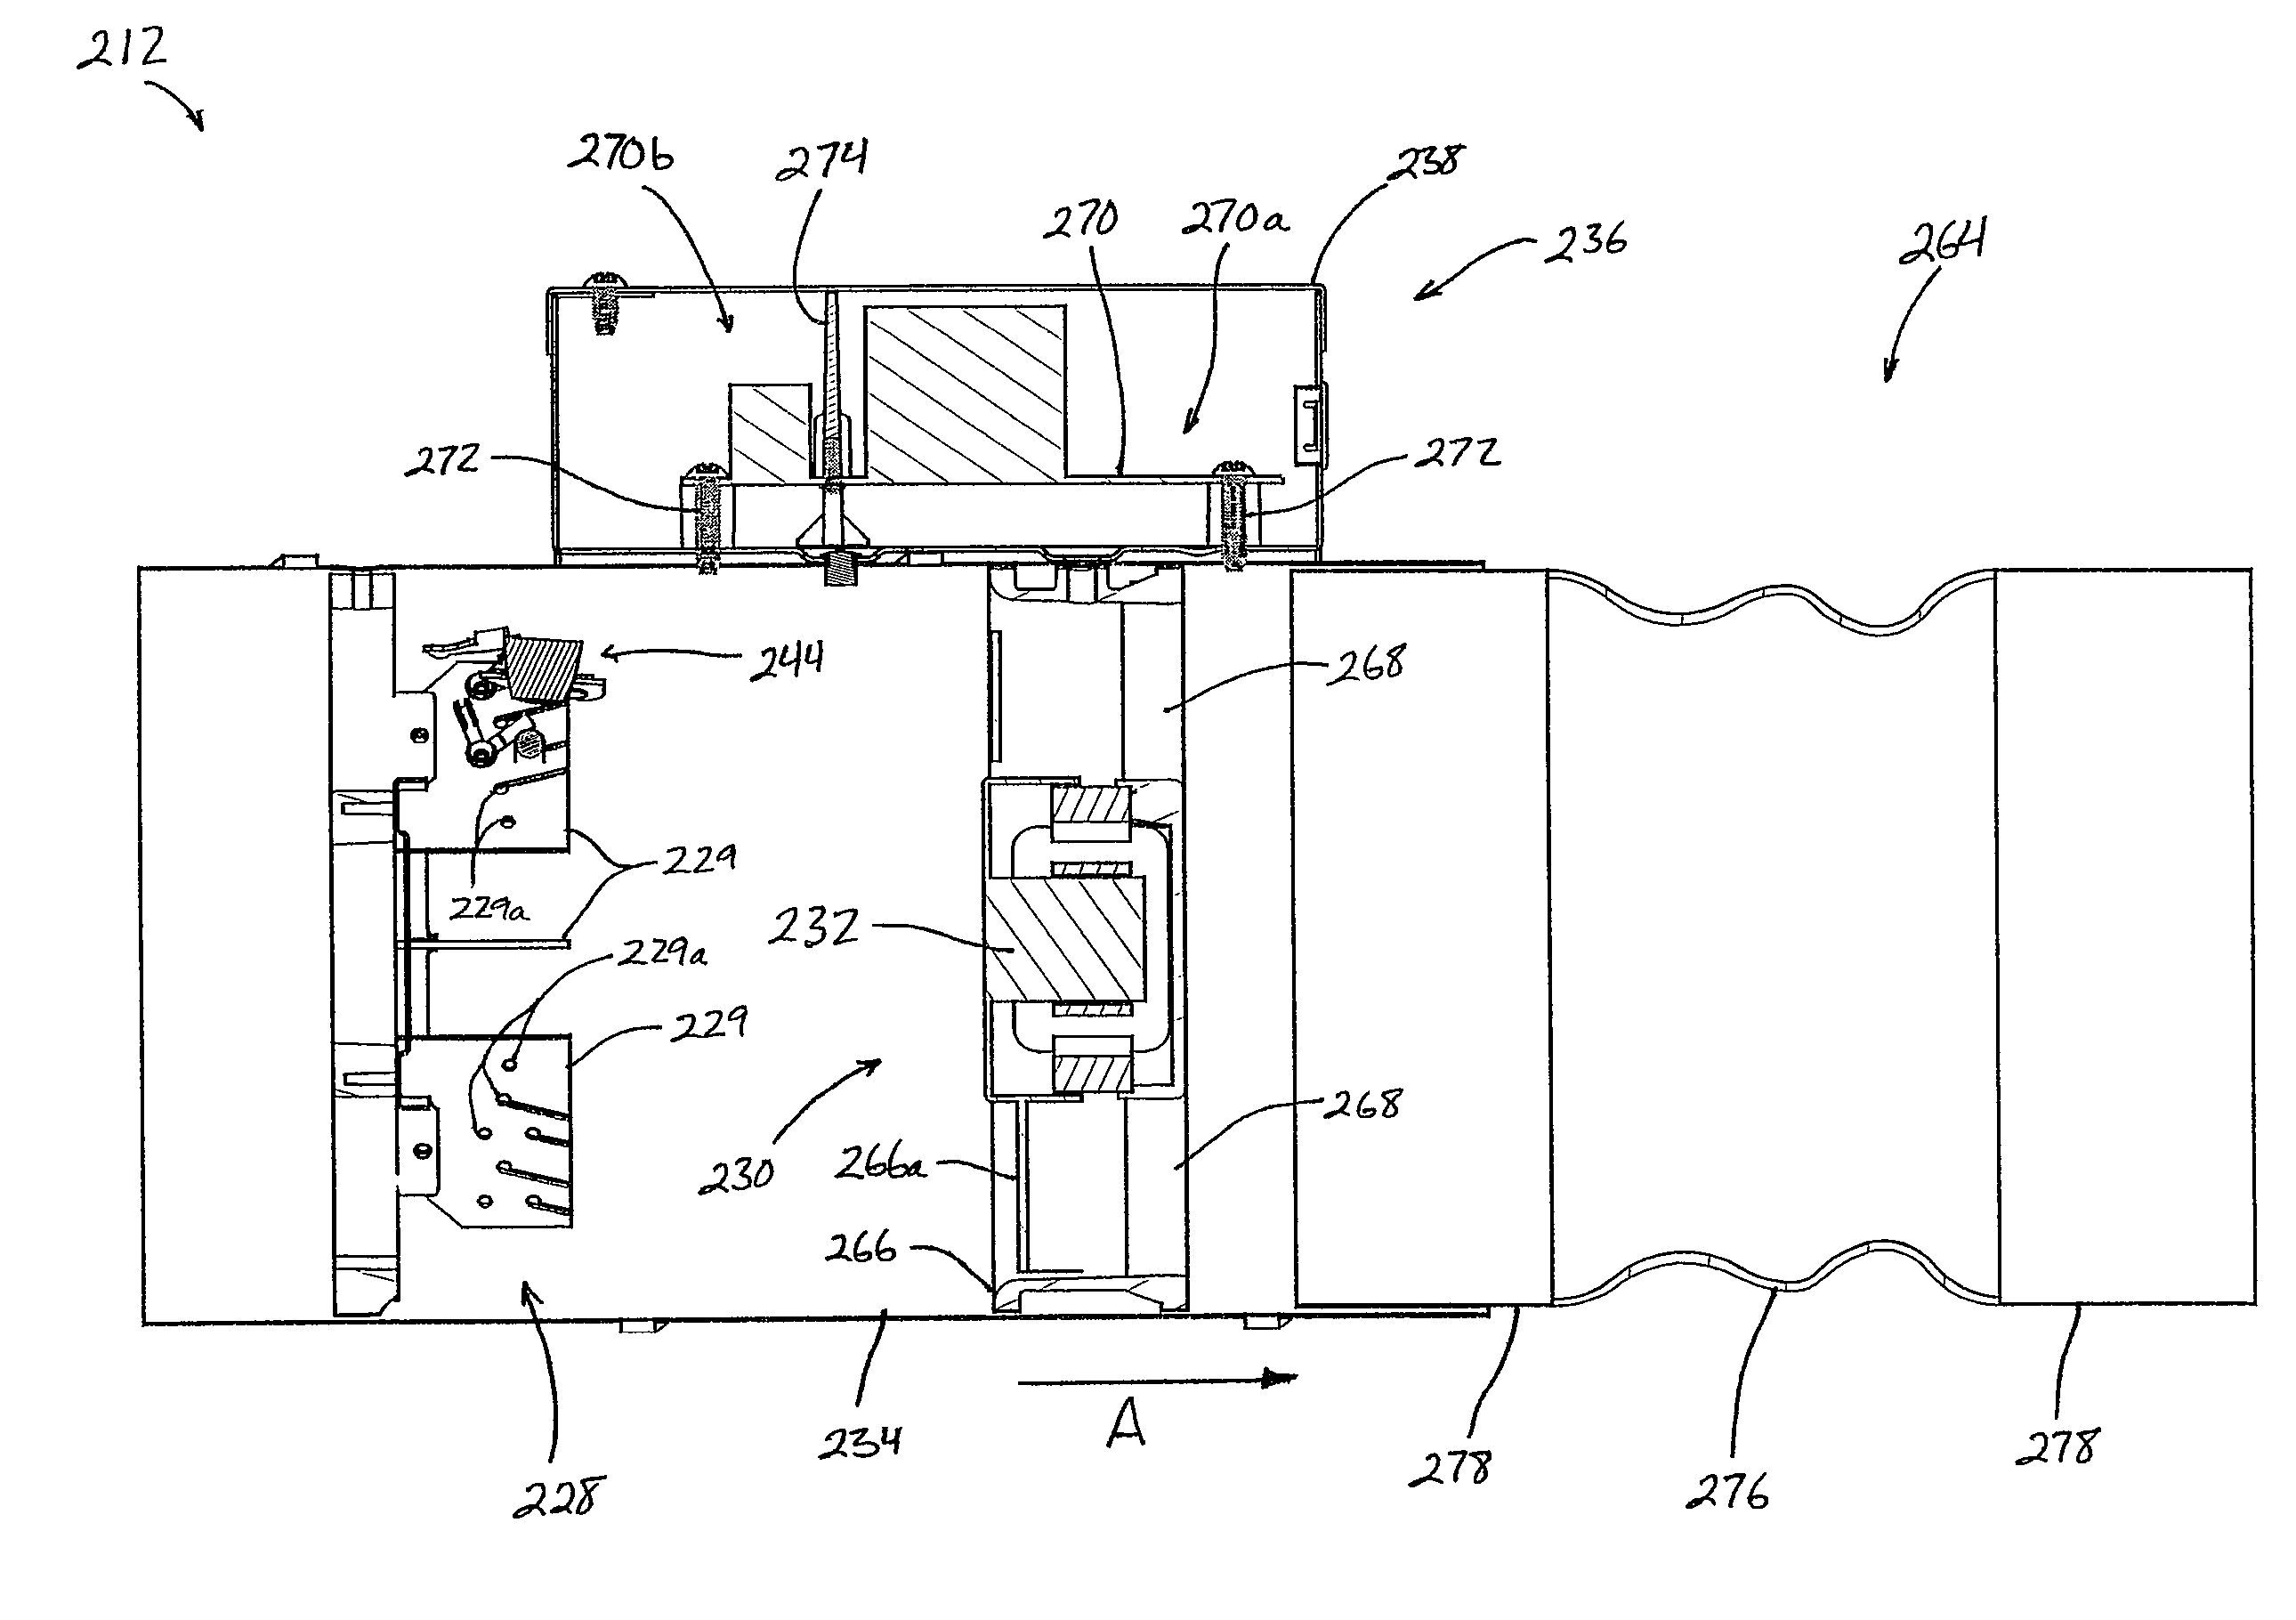 In-line duct supplemental heating and cooling device and method